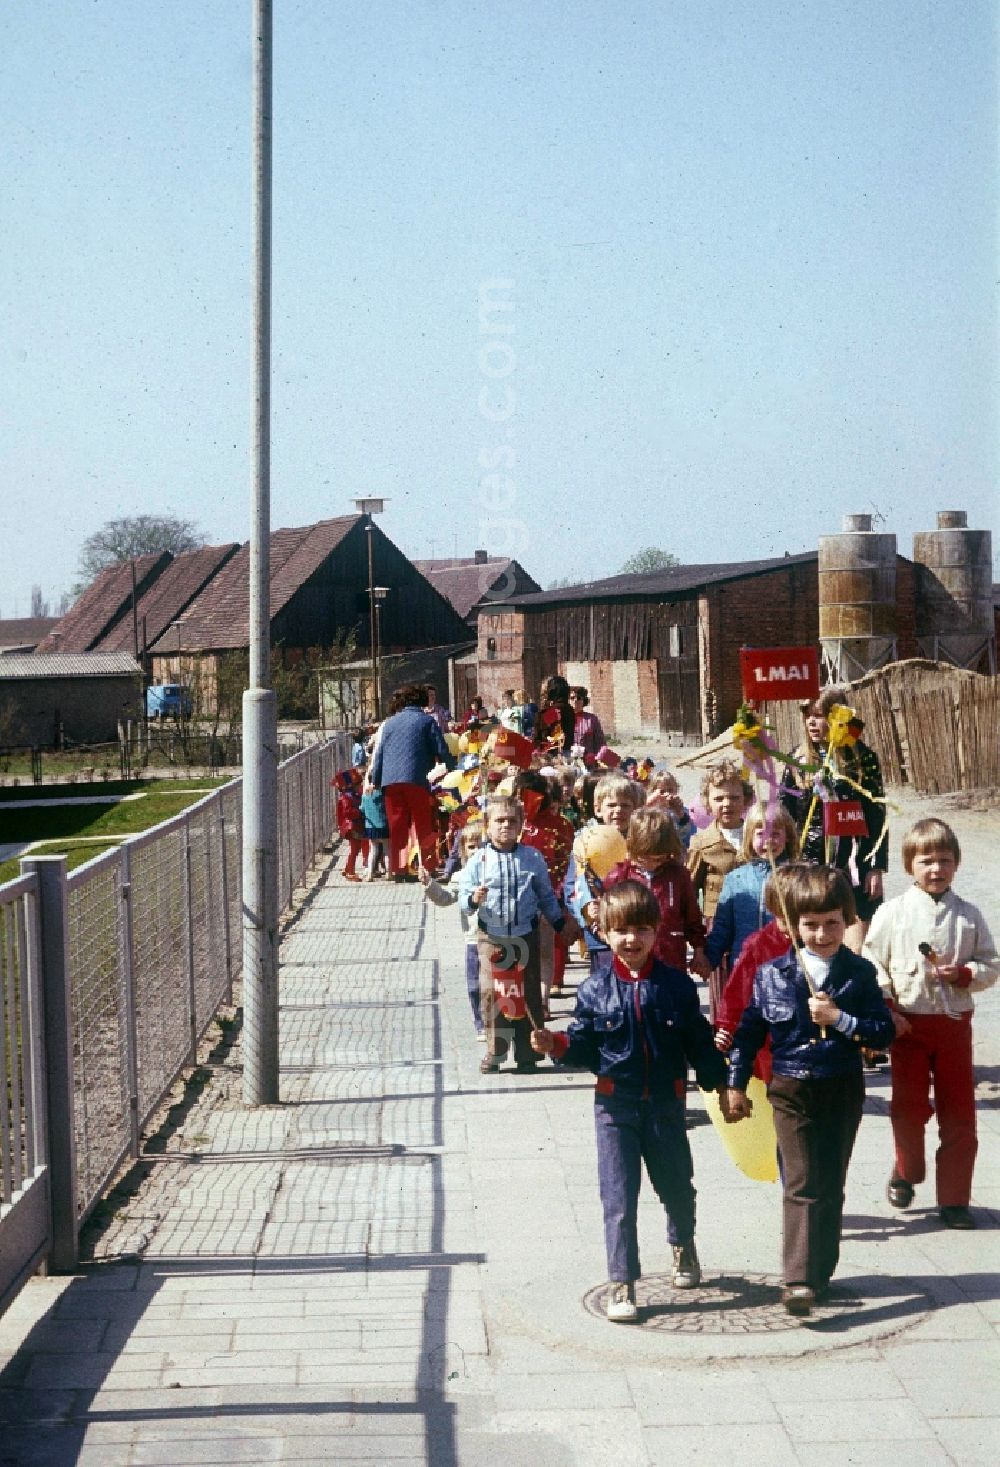 GDR picture archive: Neustrelitz - A nursery school group, with balloons and flags, on the way to May 1 demonstration in Neustrelitz in Mecklenburg-Vorpommern in the territory of the former GDR, German Democratic Republic